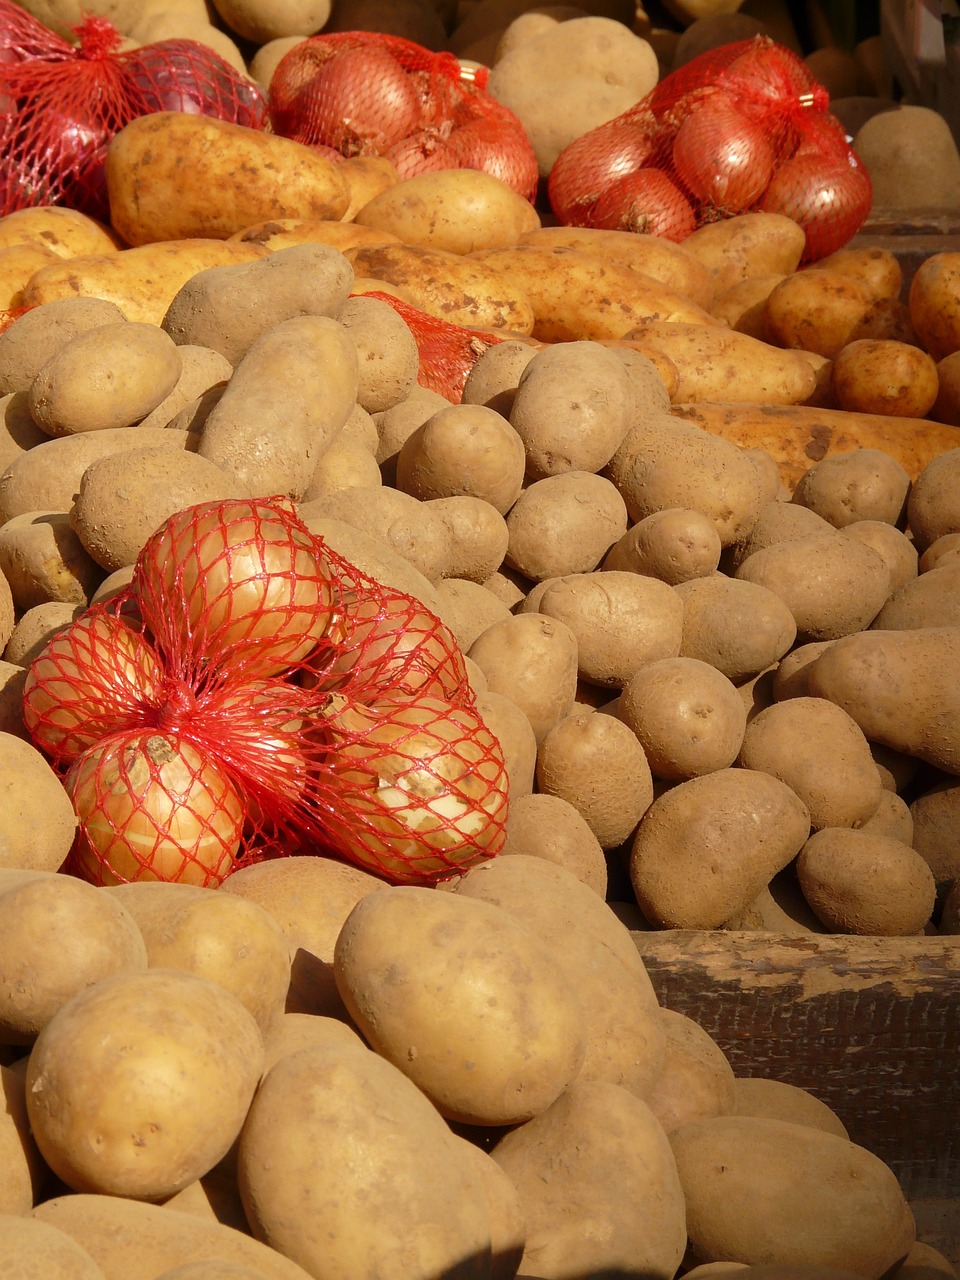 VAT on daily consumables - potato and onion